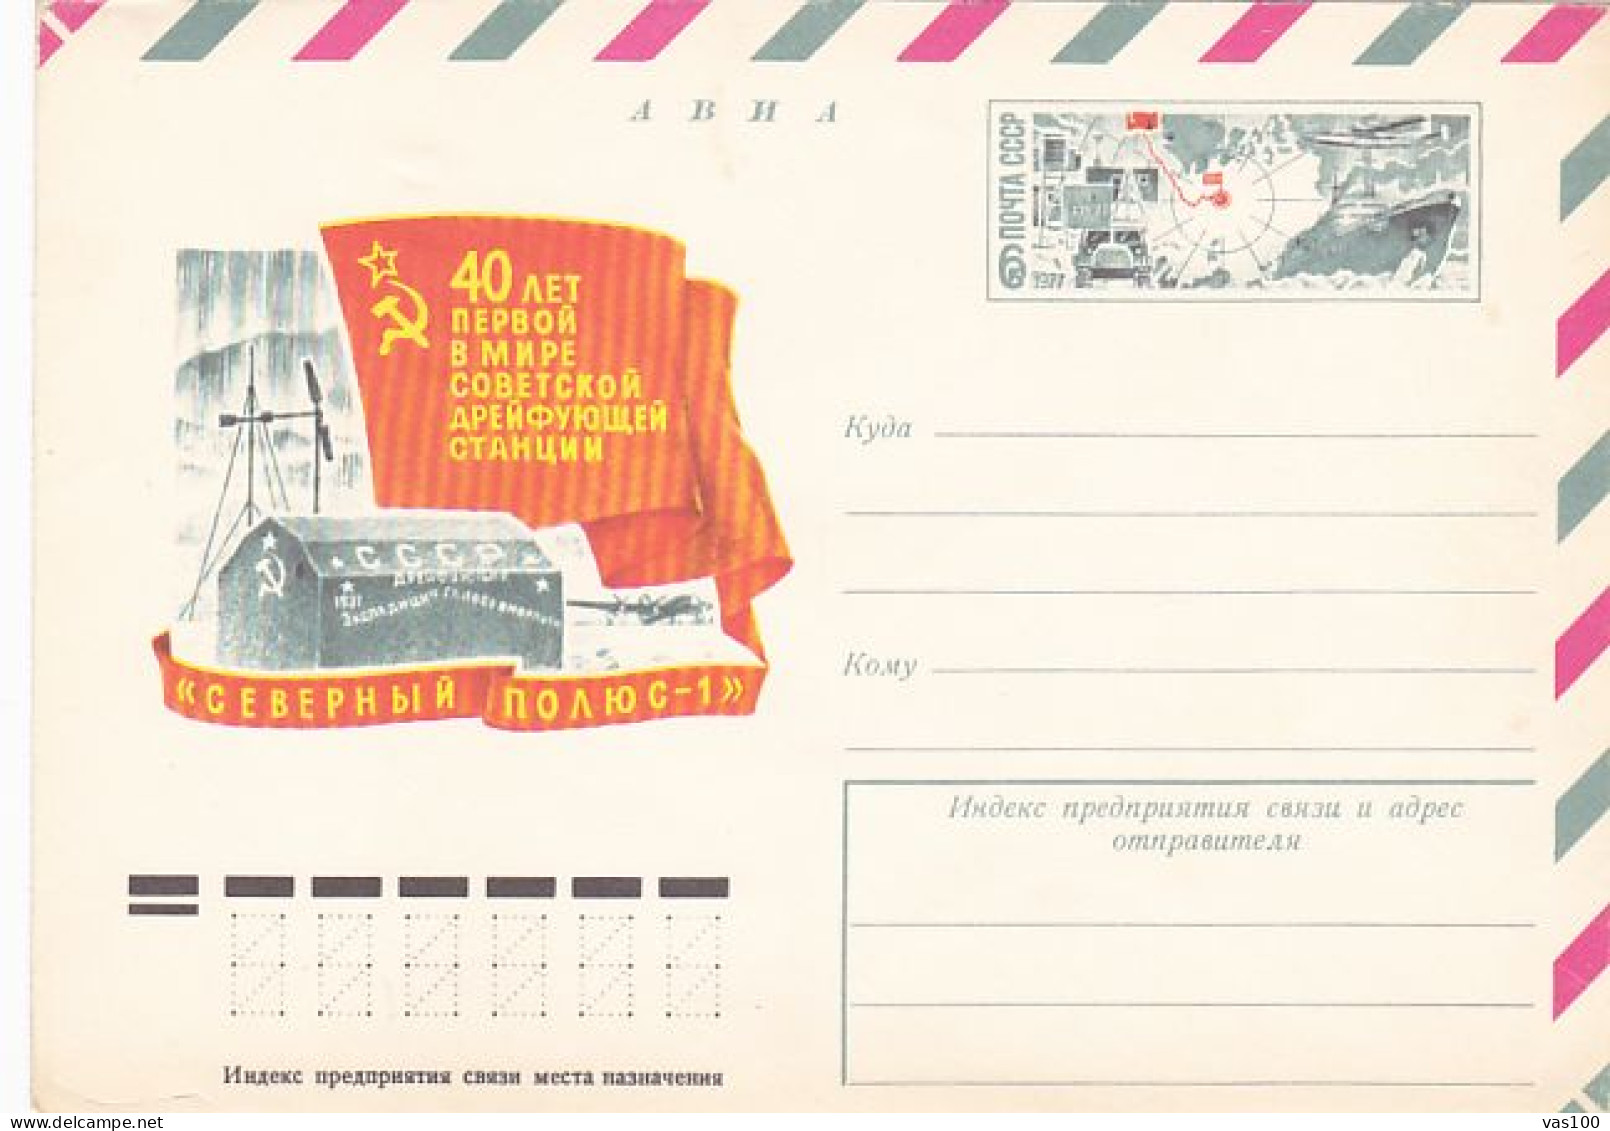 NORTH POLE, RUSSIAN NORTH POLE 1 REASERCH STATION, COVER STATIONERY, ENTIER POSTAL, 1977, RUSSIA - Forschungsstationen & Arctic Driftstationen